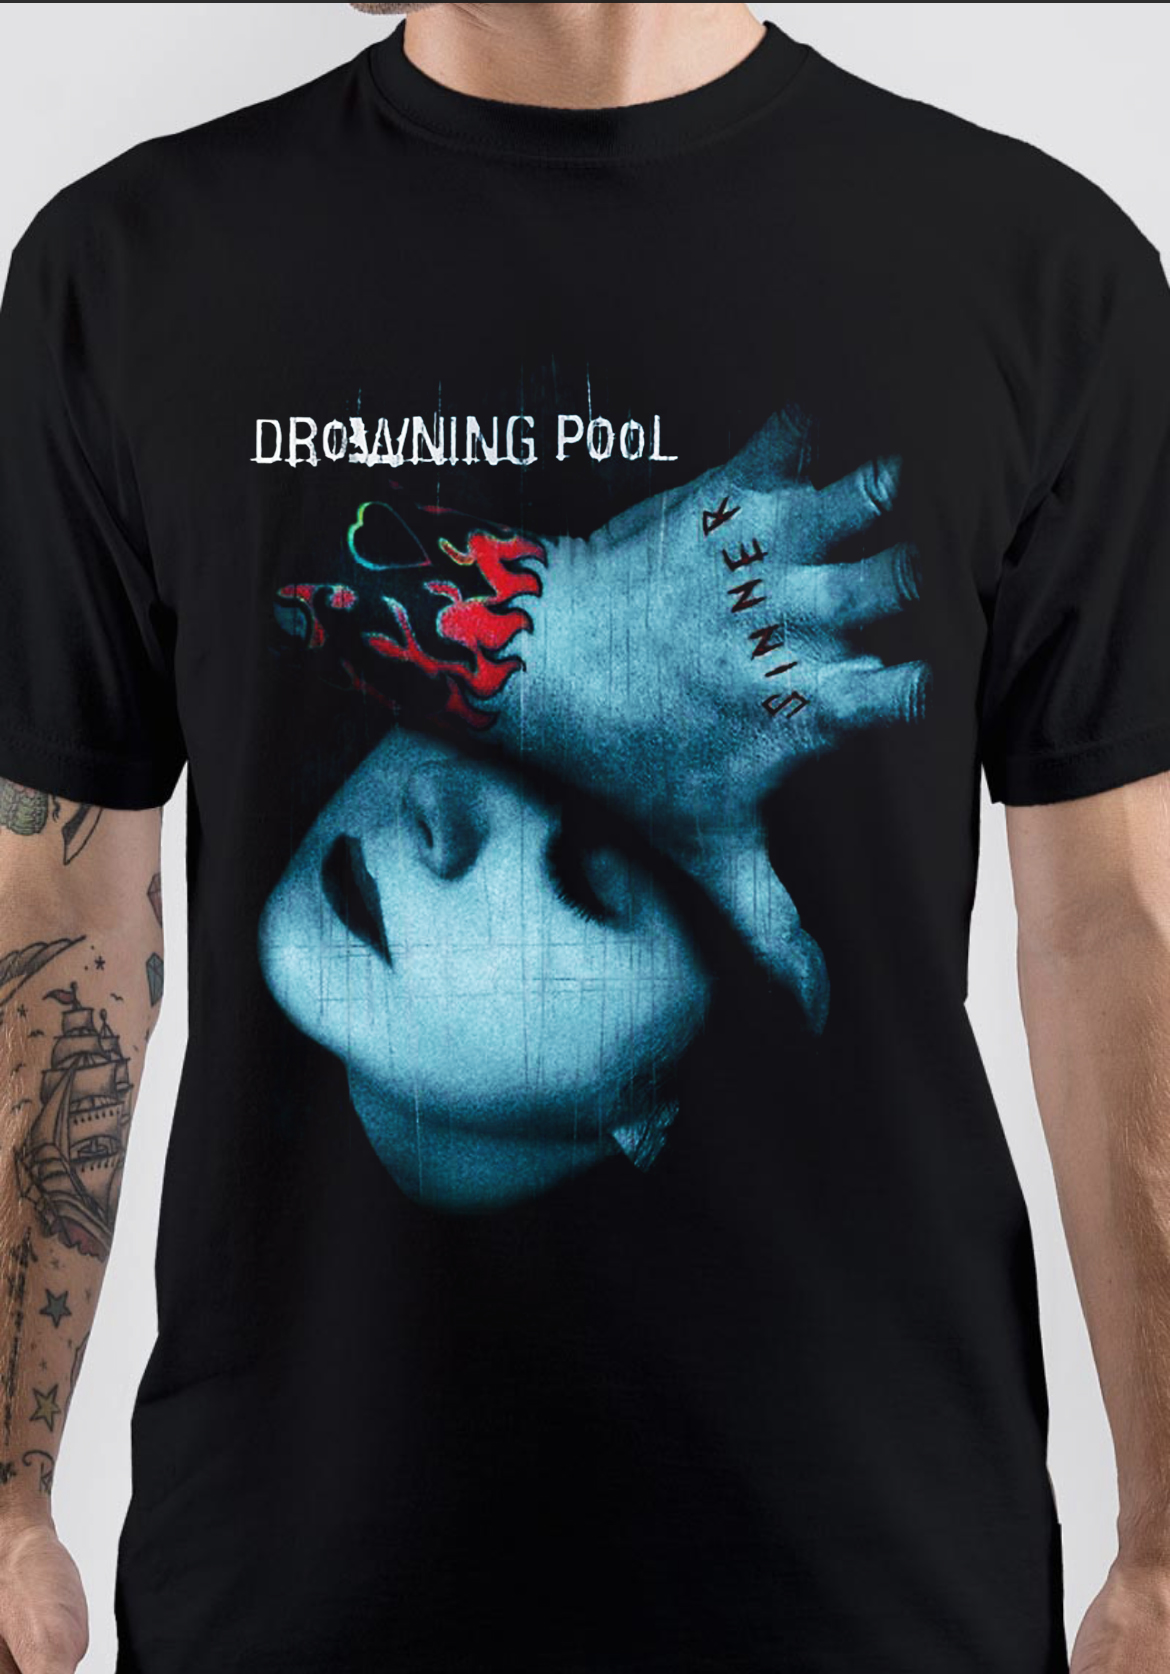 Drowning Pool T-Shirt And Merchandise